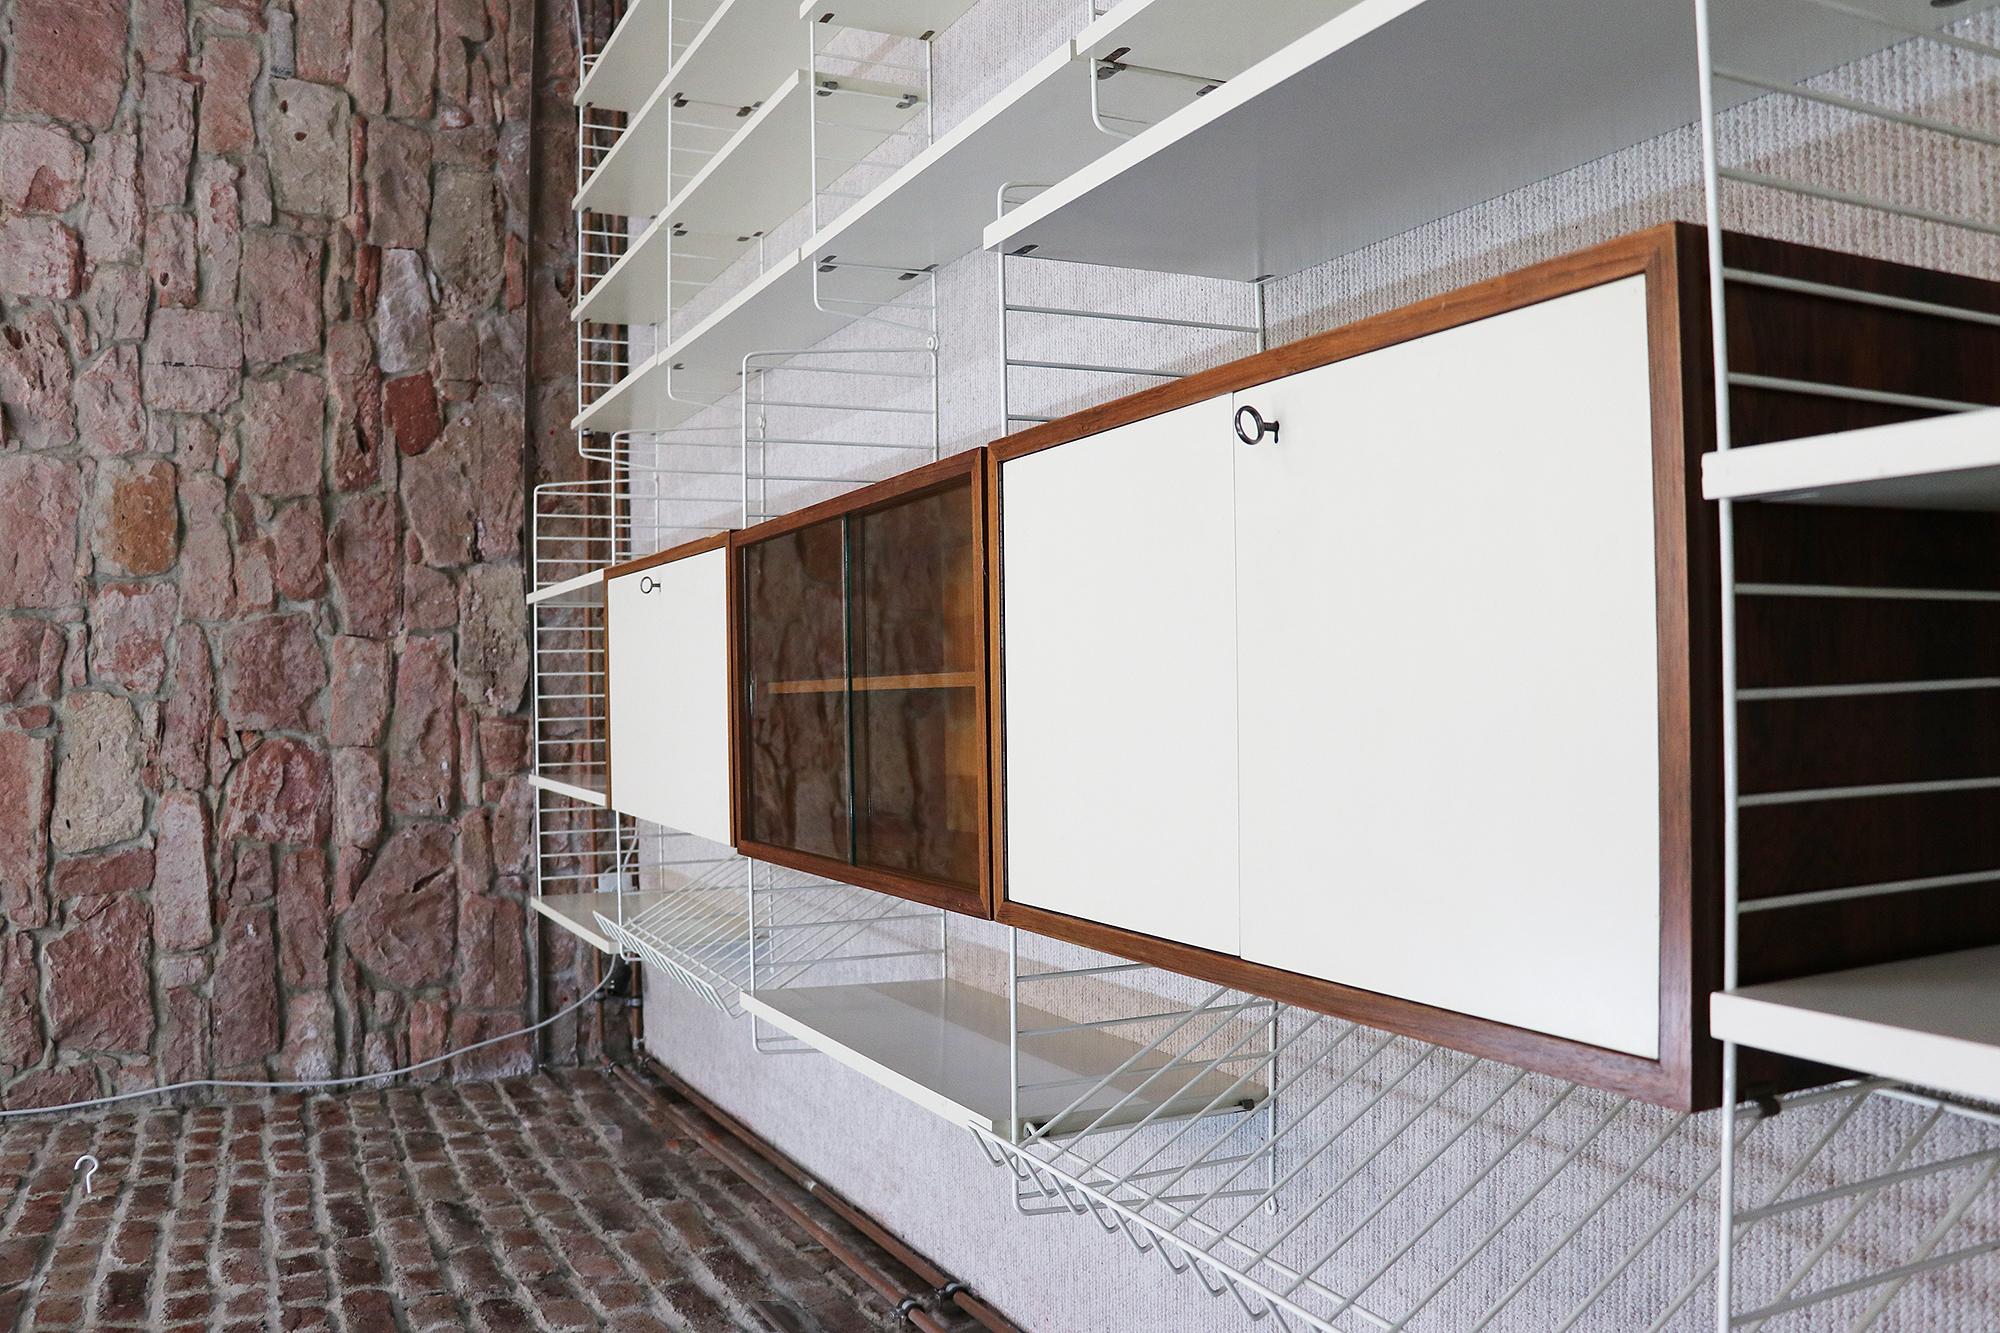 Extra large modular and adaptable shelving system consisting of white lacquered shelving mounted between ladder elements in white lacquered wire steel, two cabinets in white and rosewood, one display cabinet with sliding glass doors in rosewood and